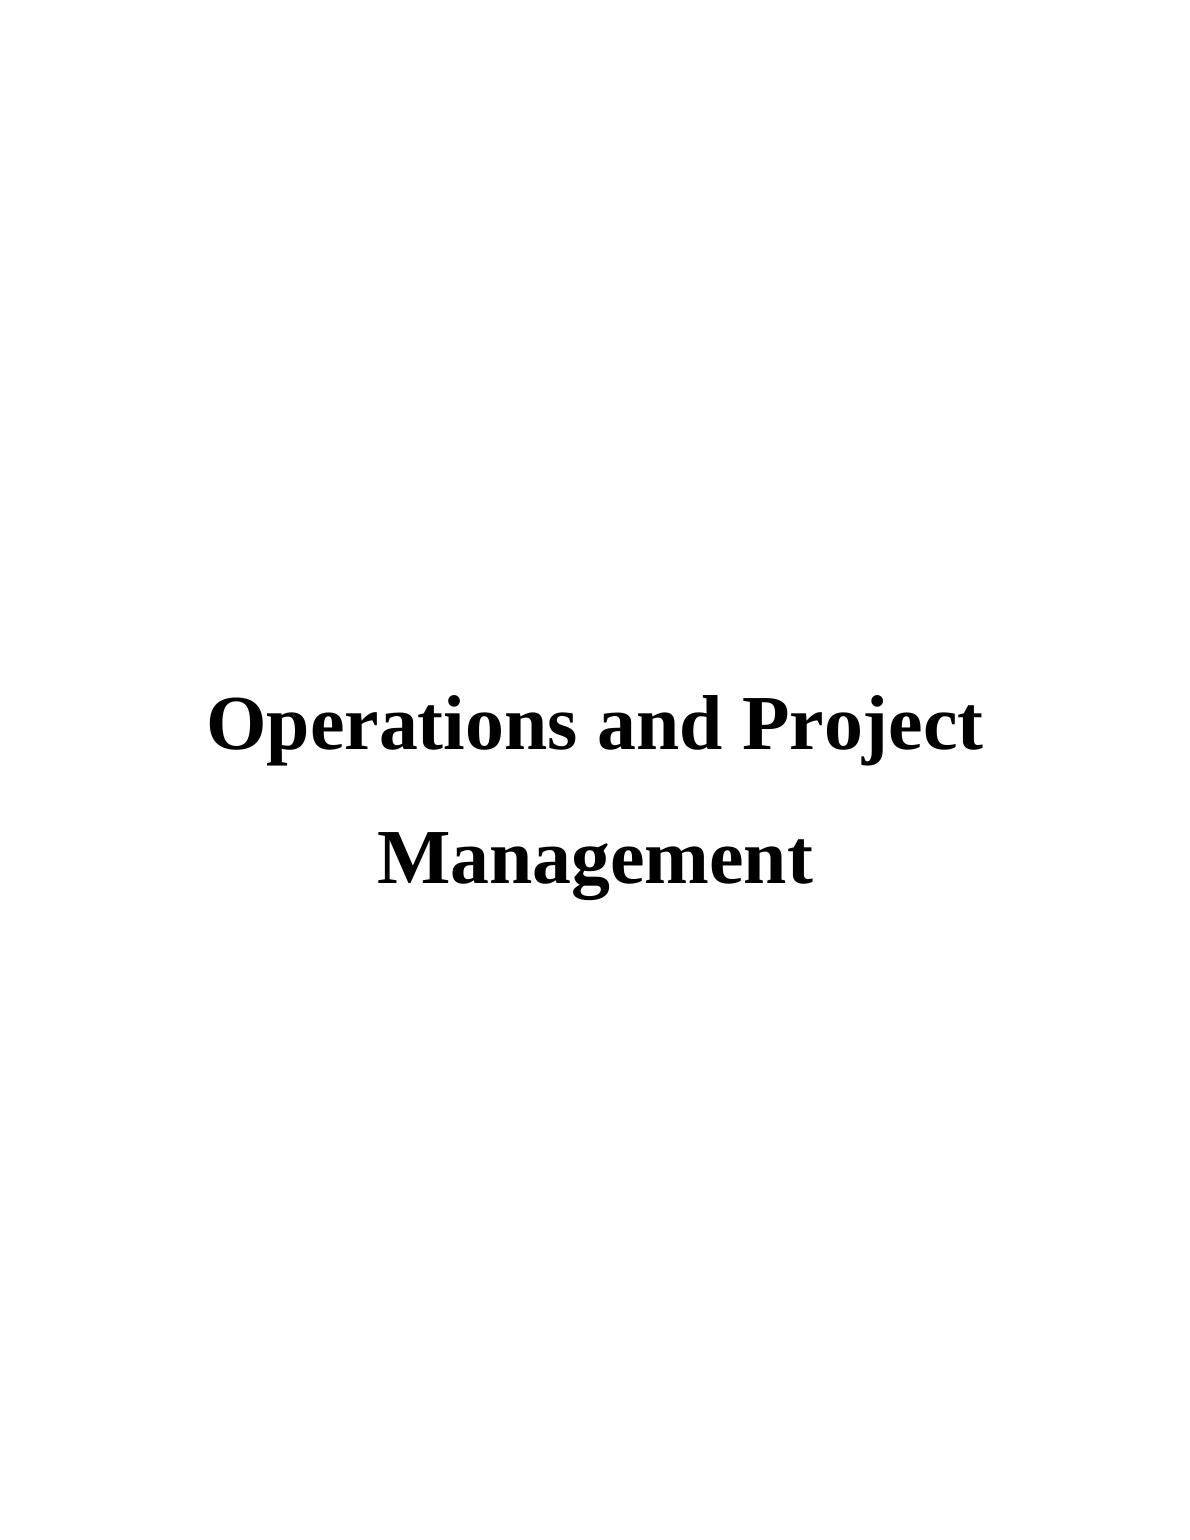 Operations and Project Management - Hotpoint  Assignment_1